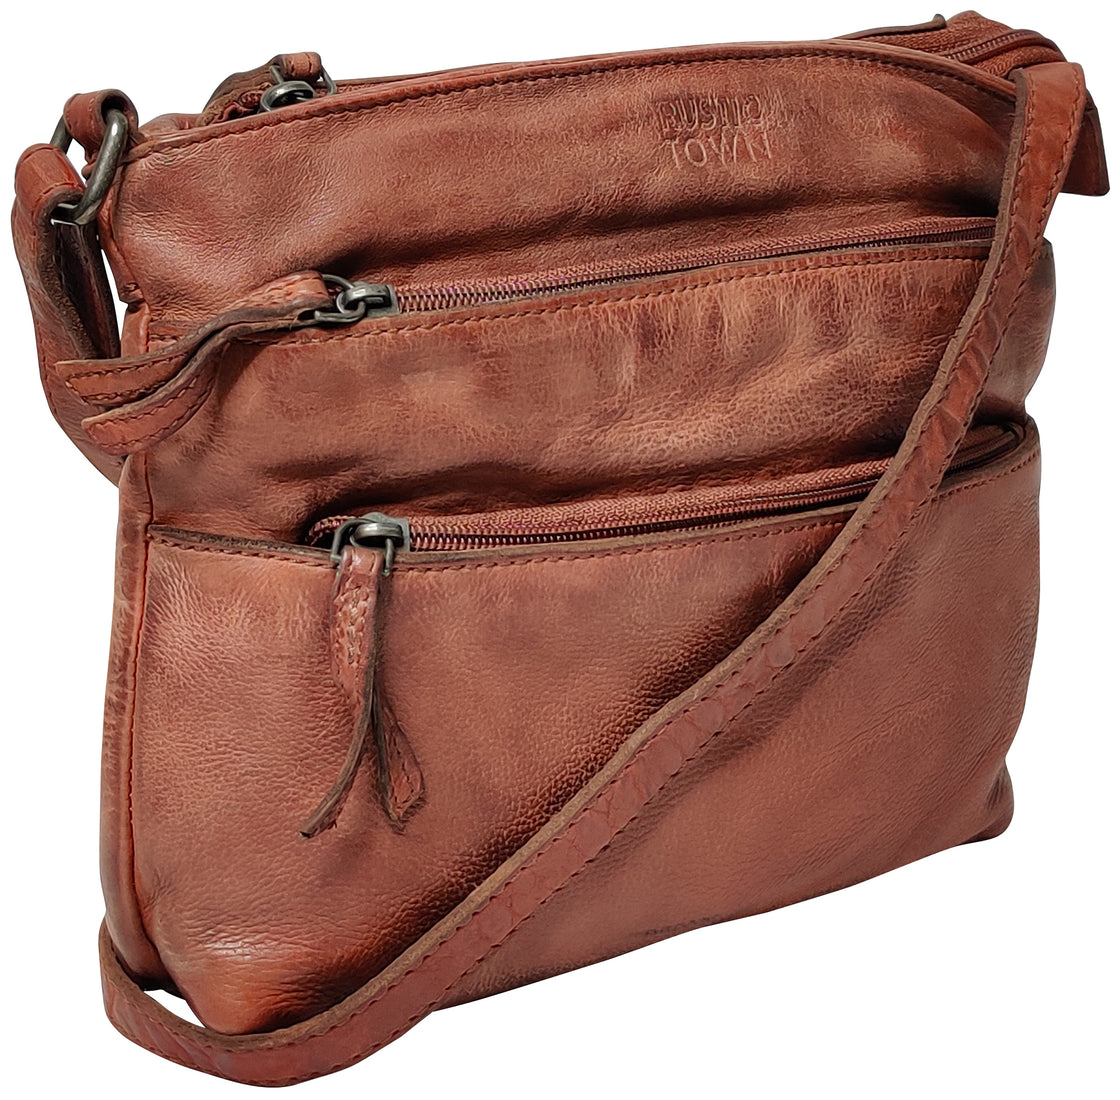 Leather Crossbody Bag for Women, Brick Red